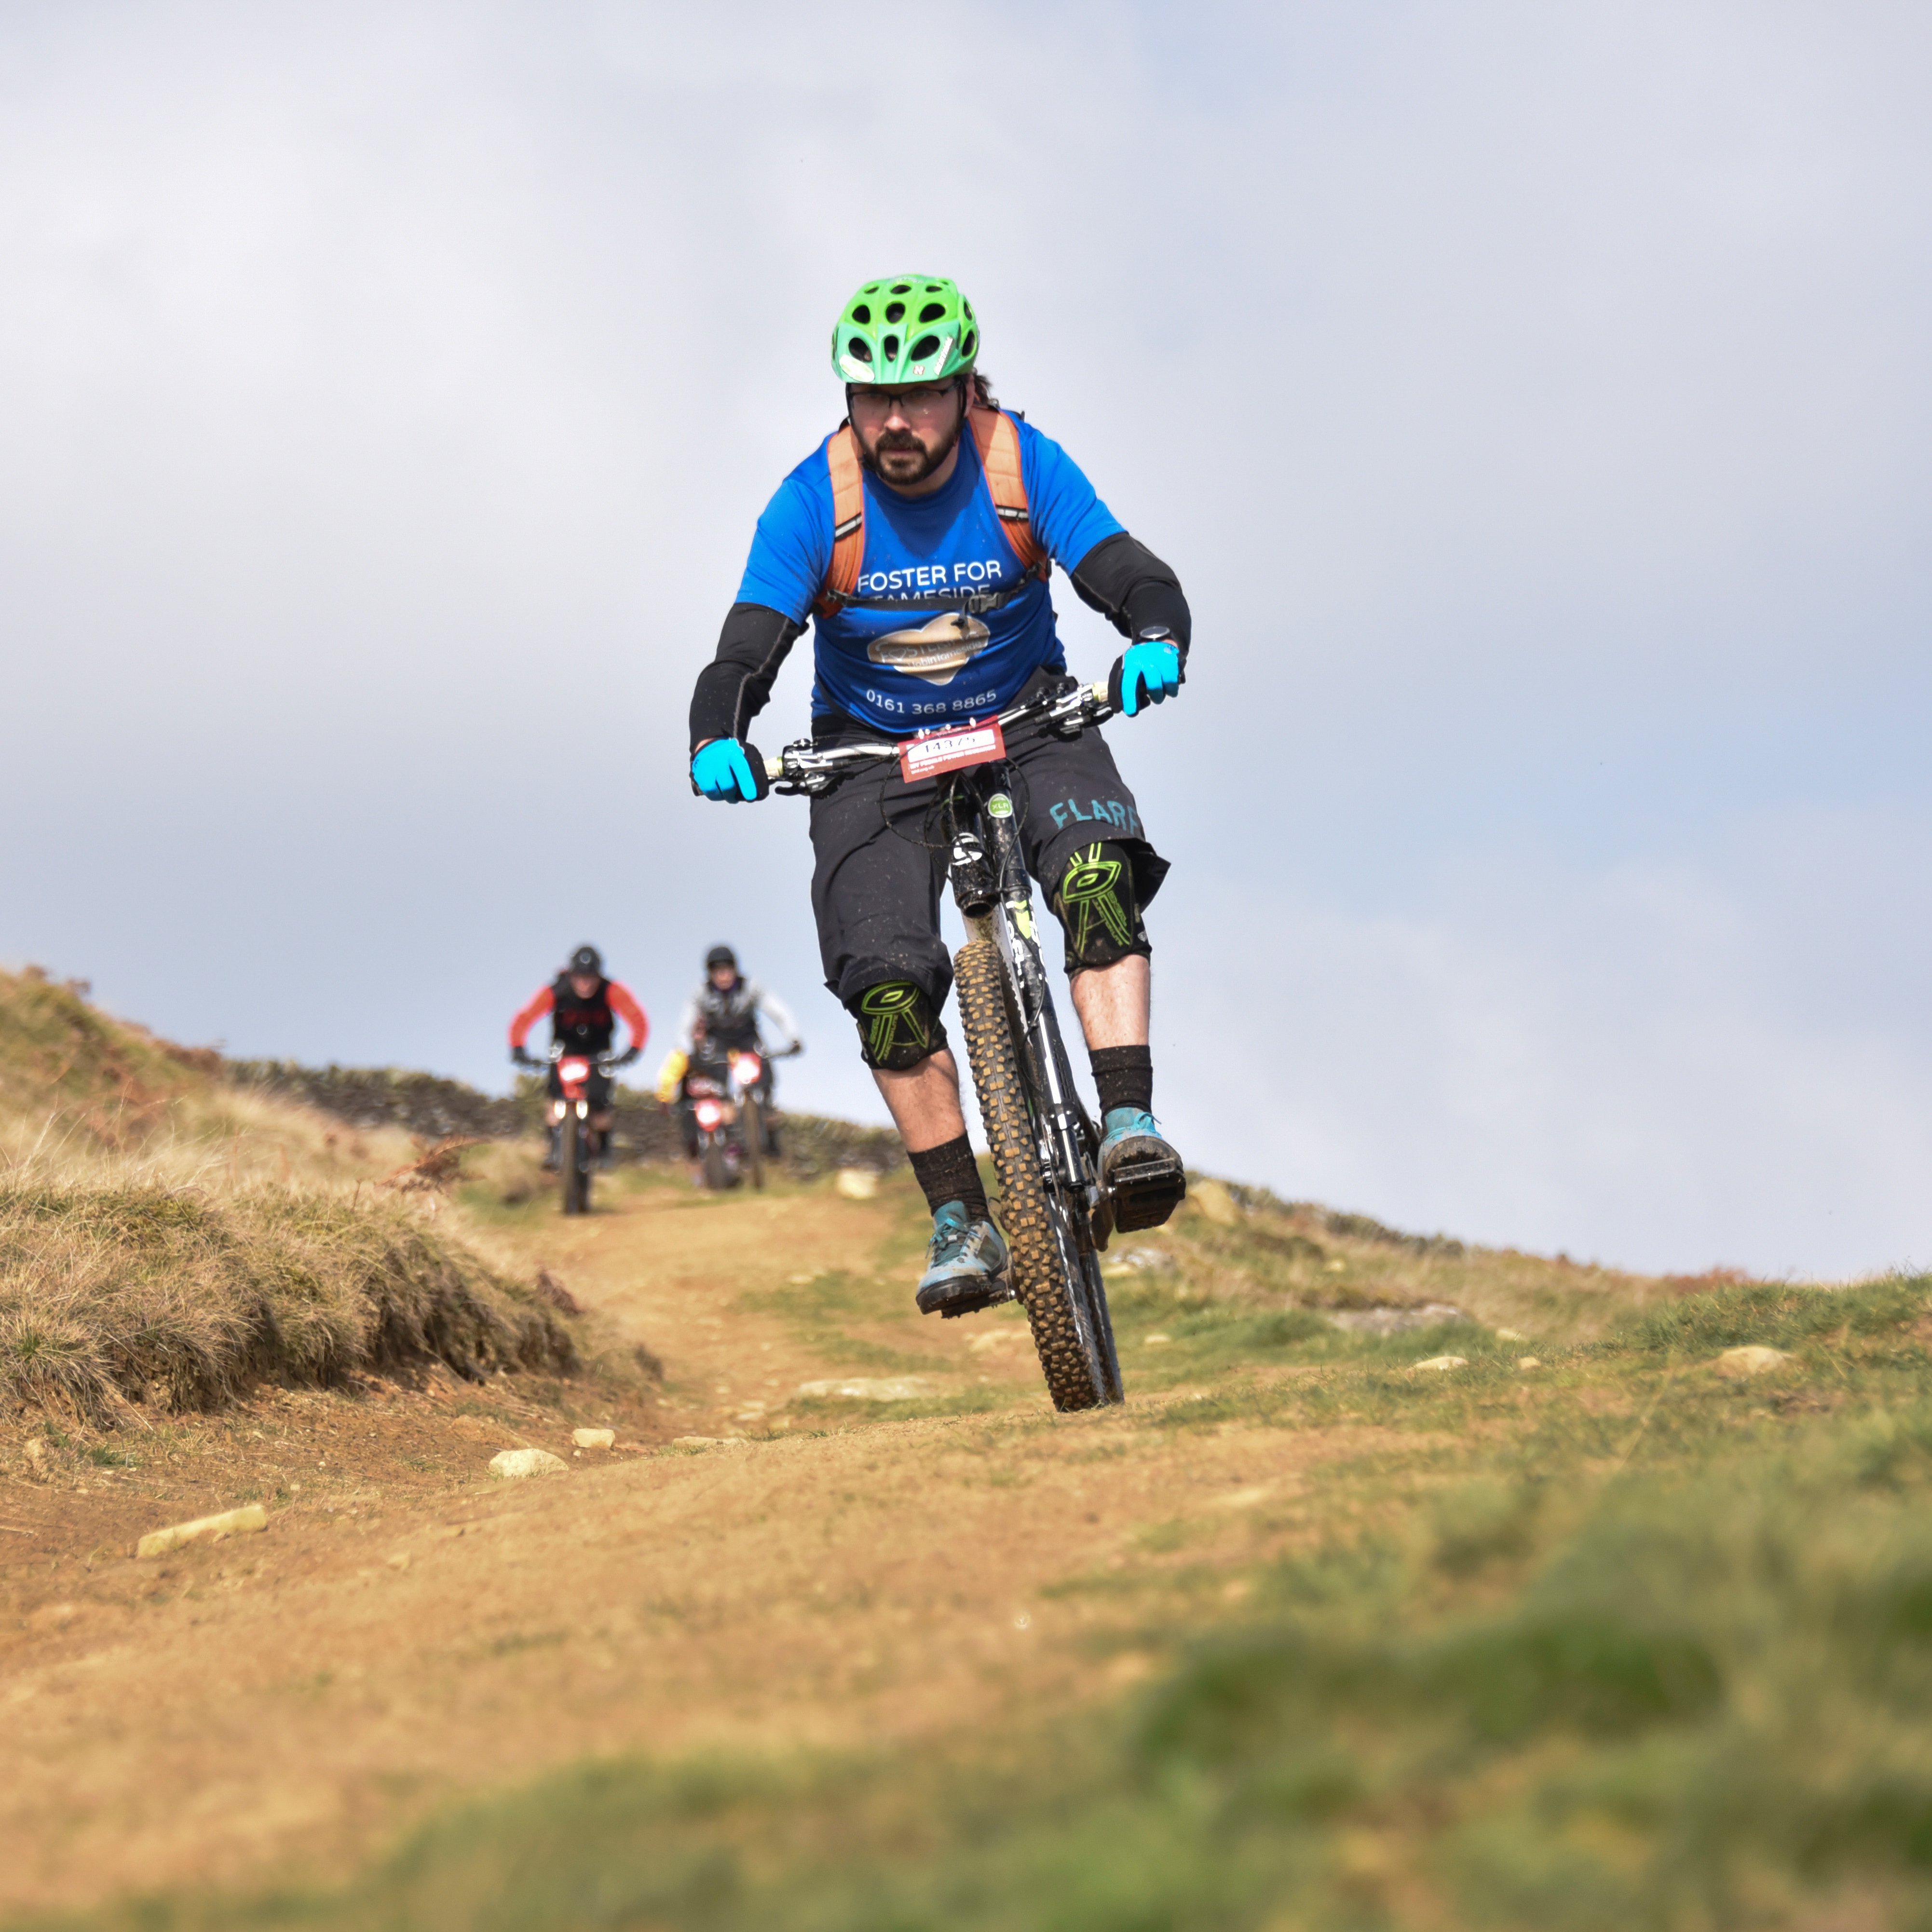 MIAS level 4
Mountain bike instructor/tutor, MIAS night ride leader, outdoor first aid trained.
Tame Valley MTB Association,
outdoor education teacher